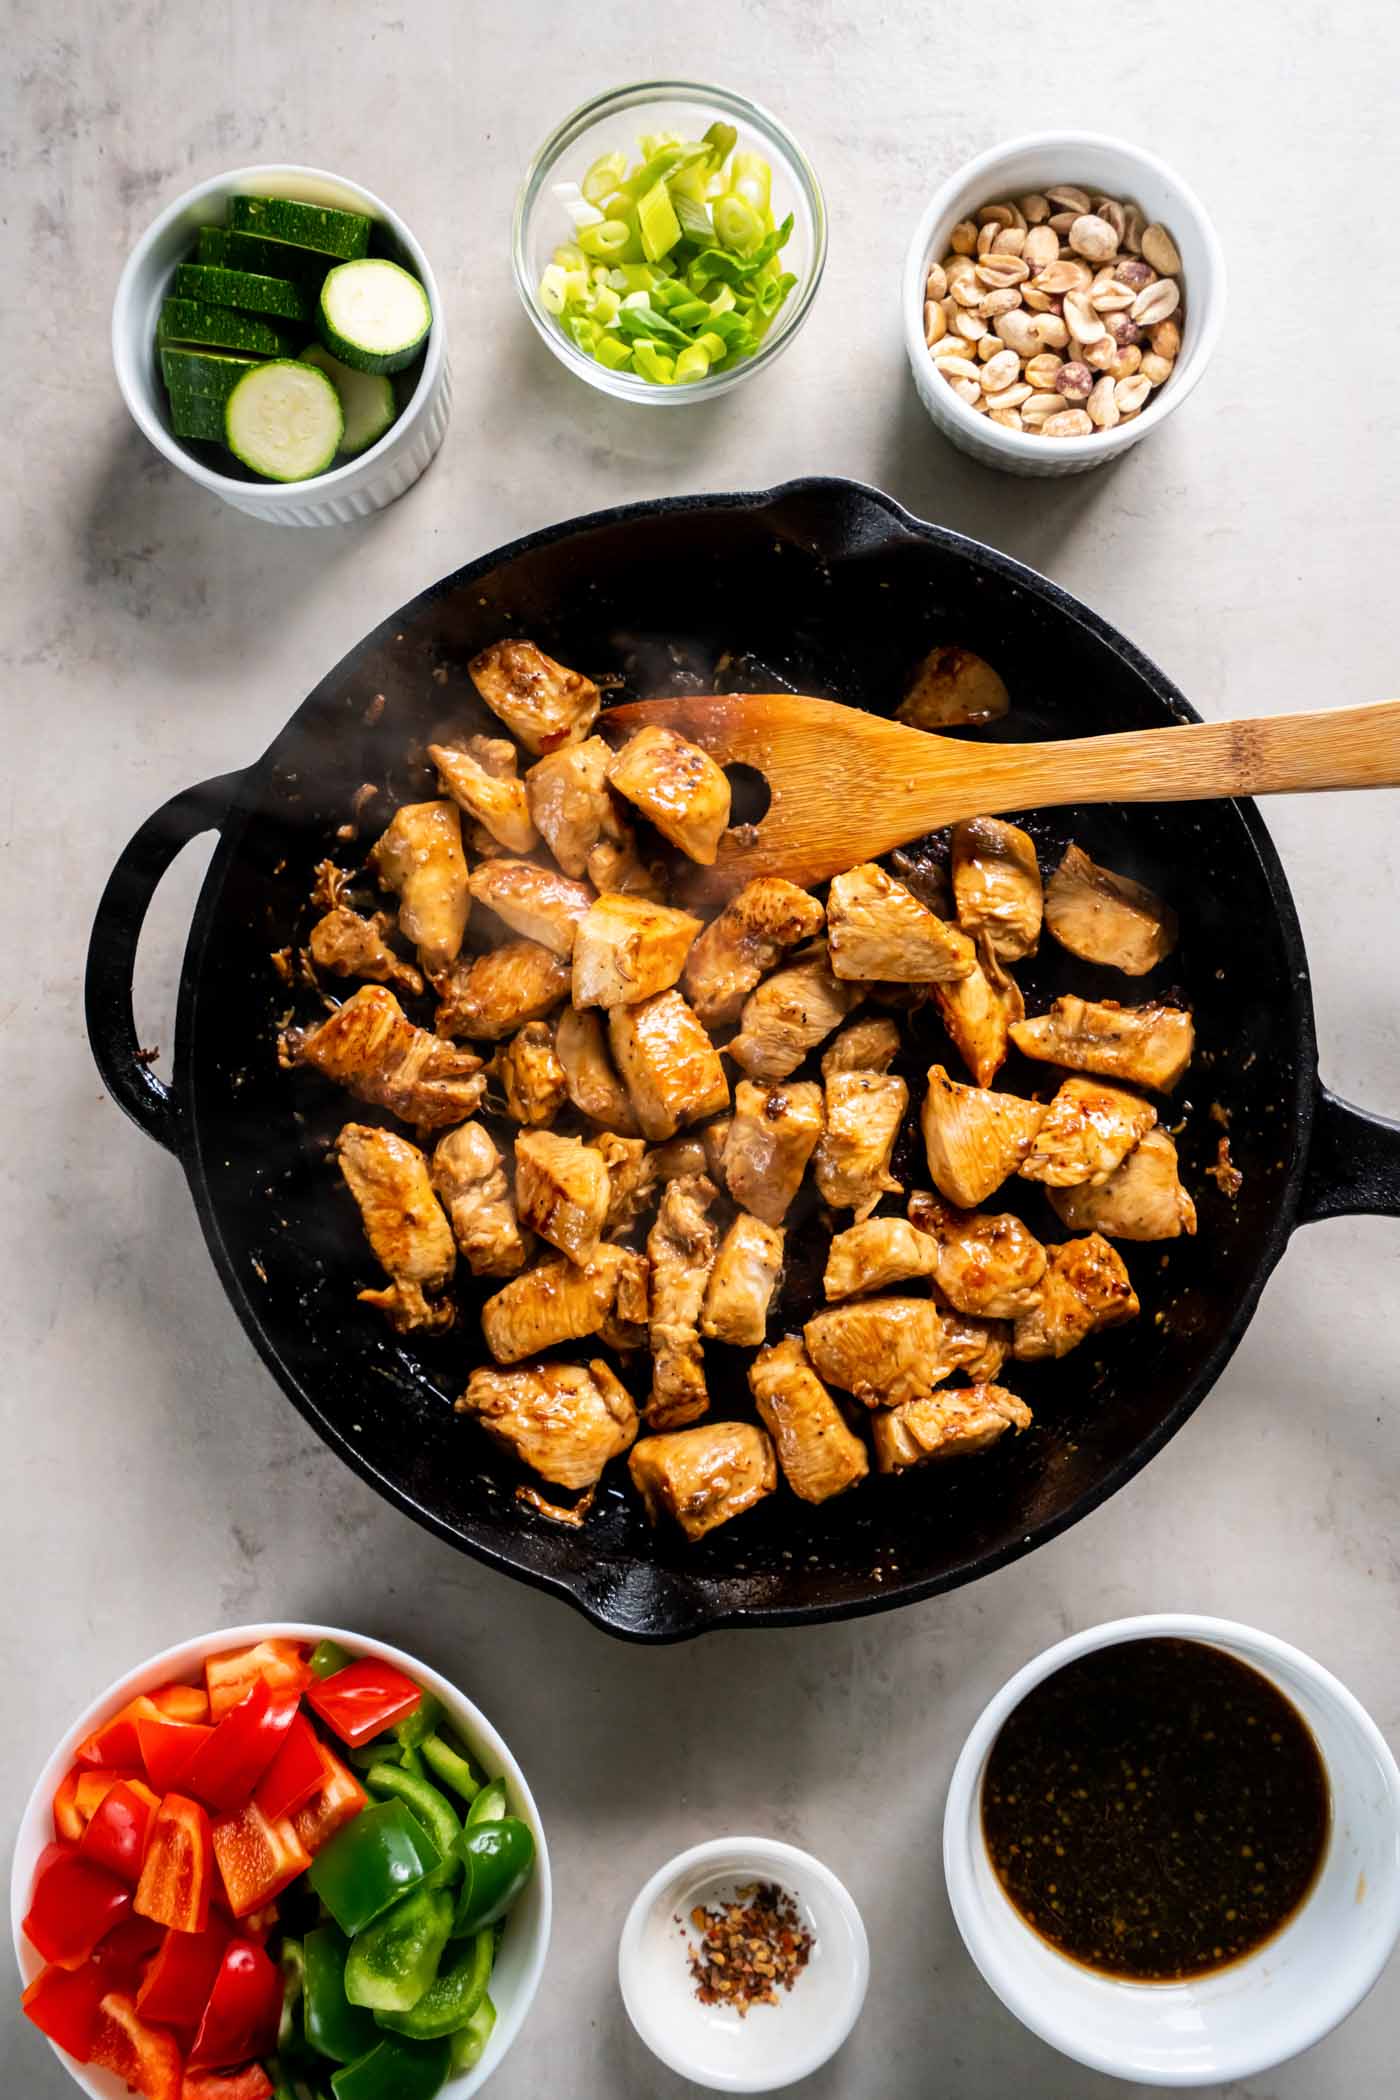 Cooked chicken pieces in skillet with a wooden spoon.